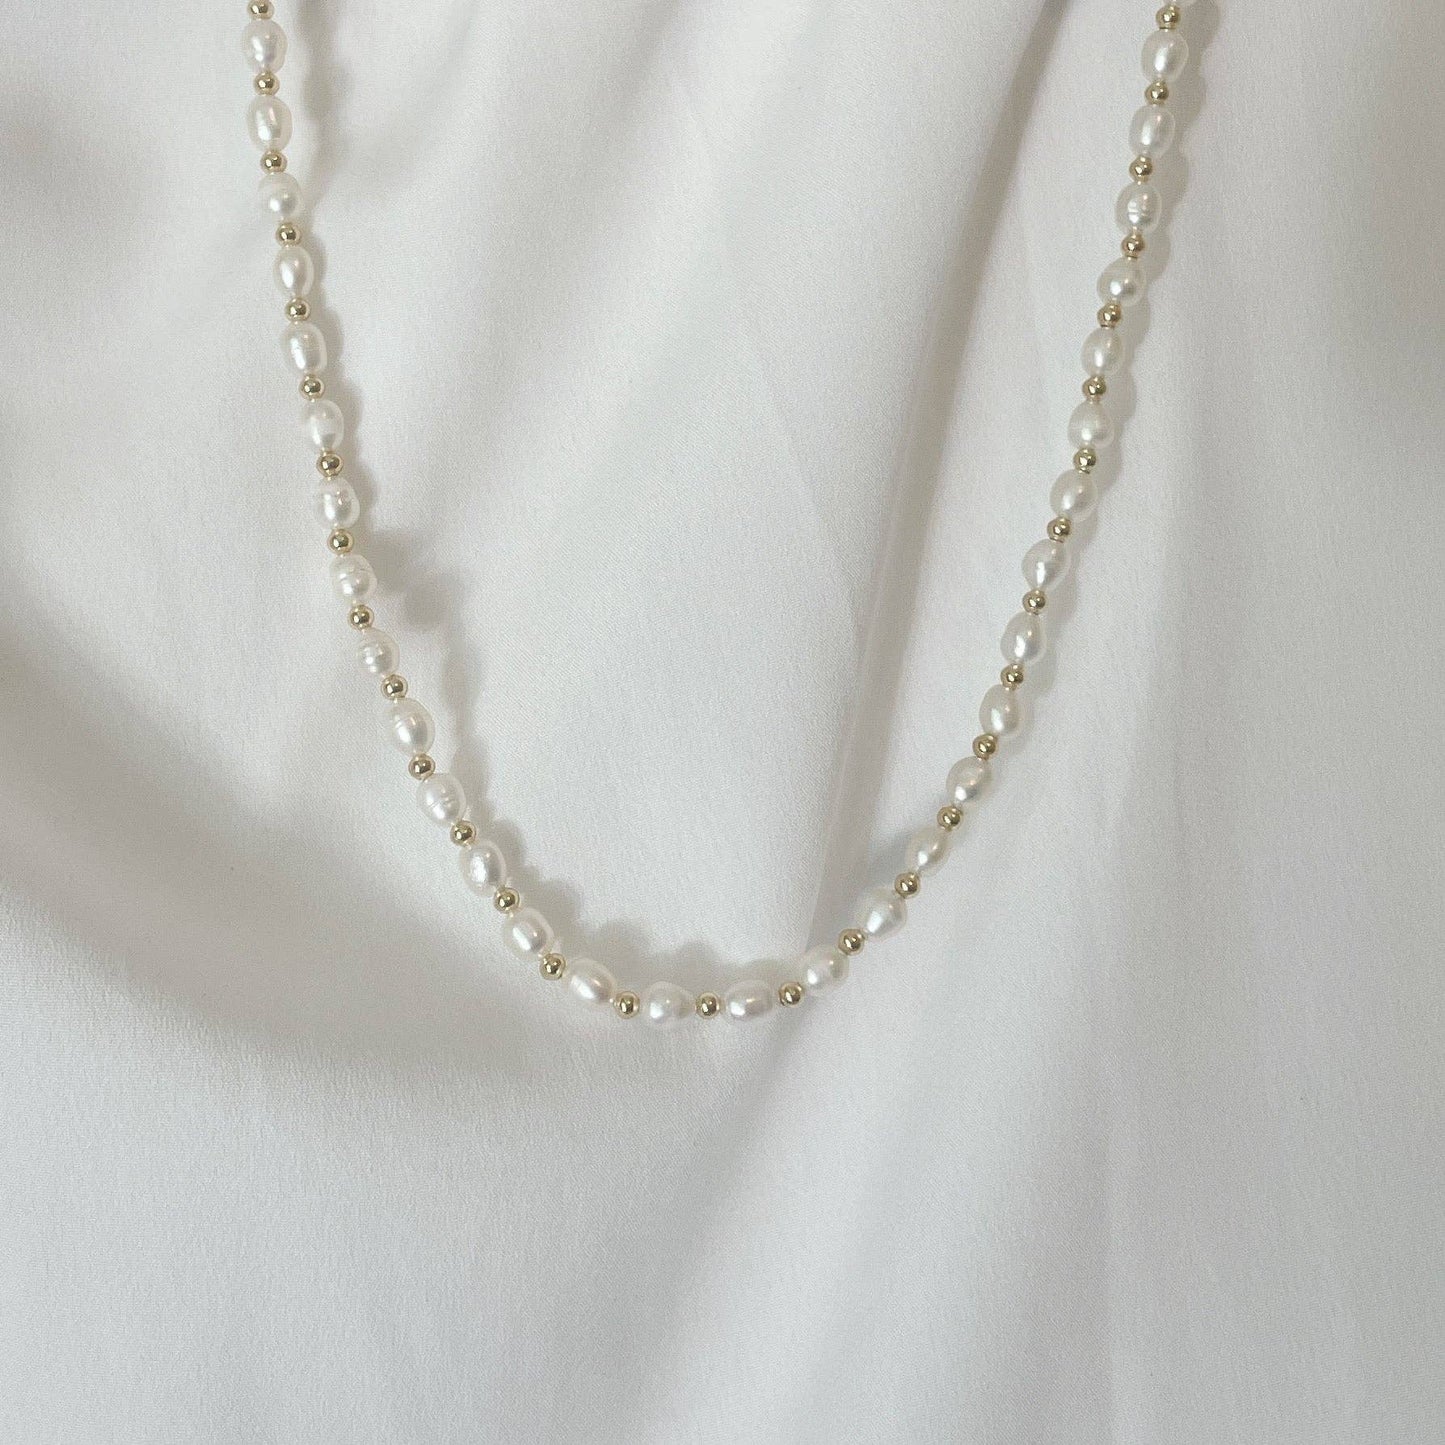 Good Vibrations Pearl and Gold Choker Necklace